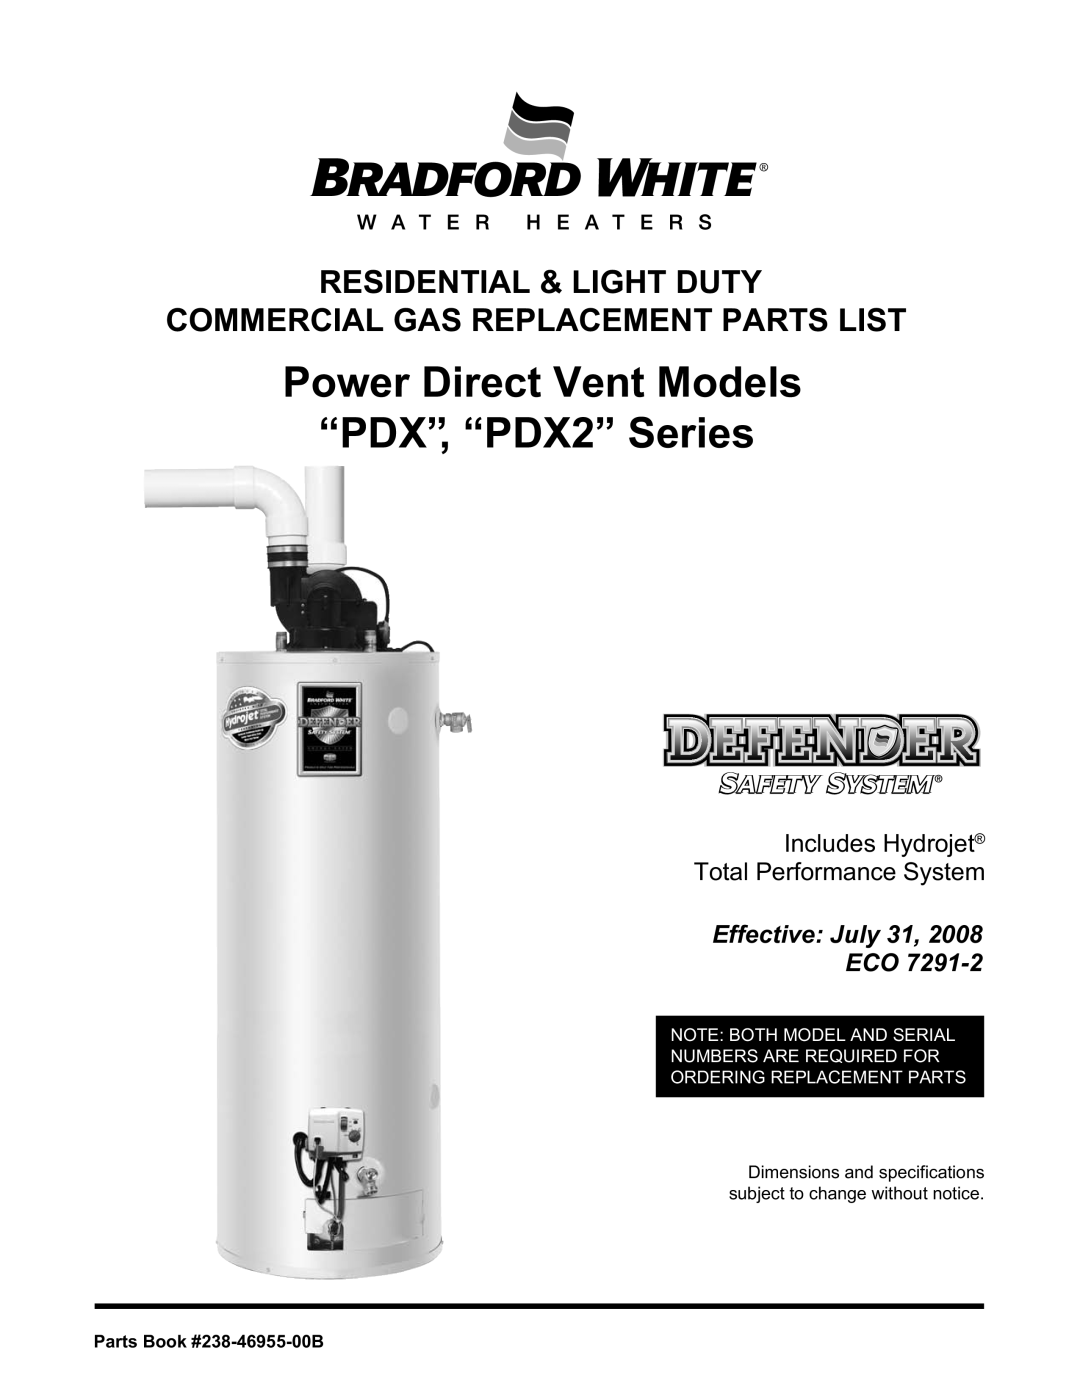 Bradford-White Corp PDX2 Series dimensions Power Direct Vent Models “PDX”, “PDX2” Series, Effective July 31 ECO 